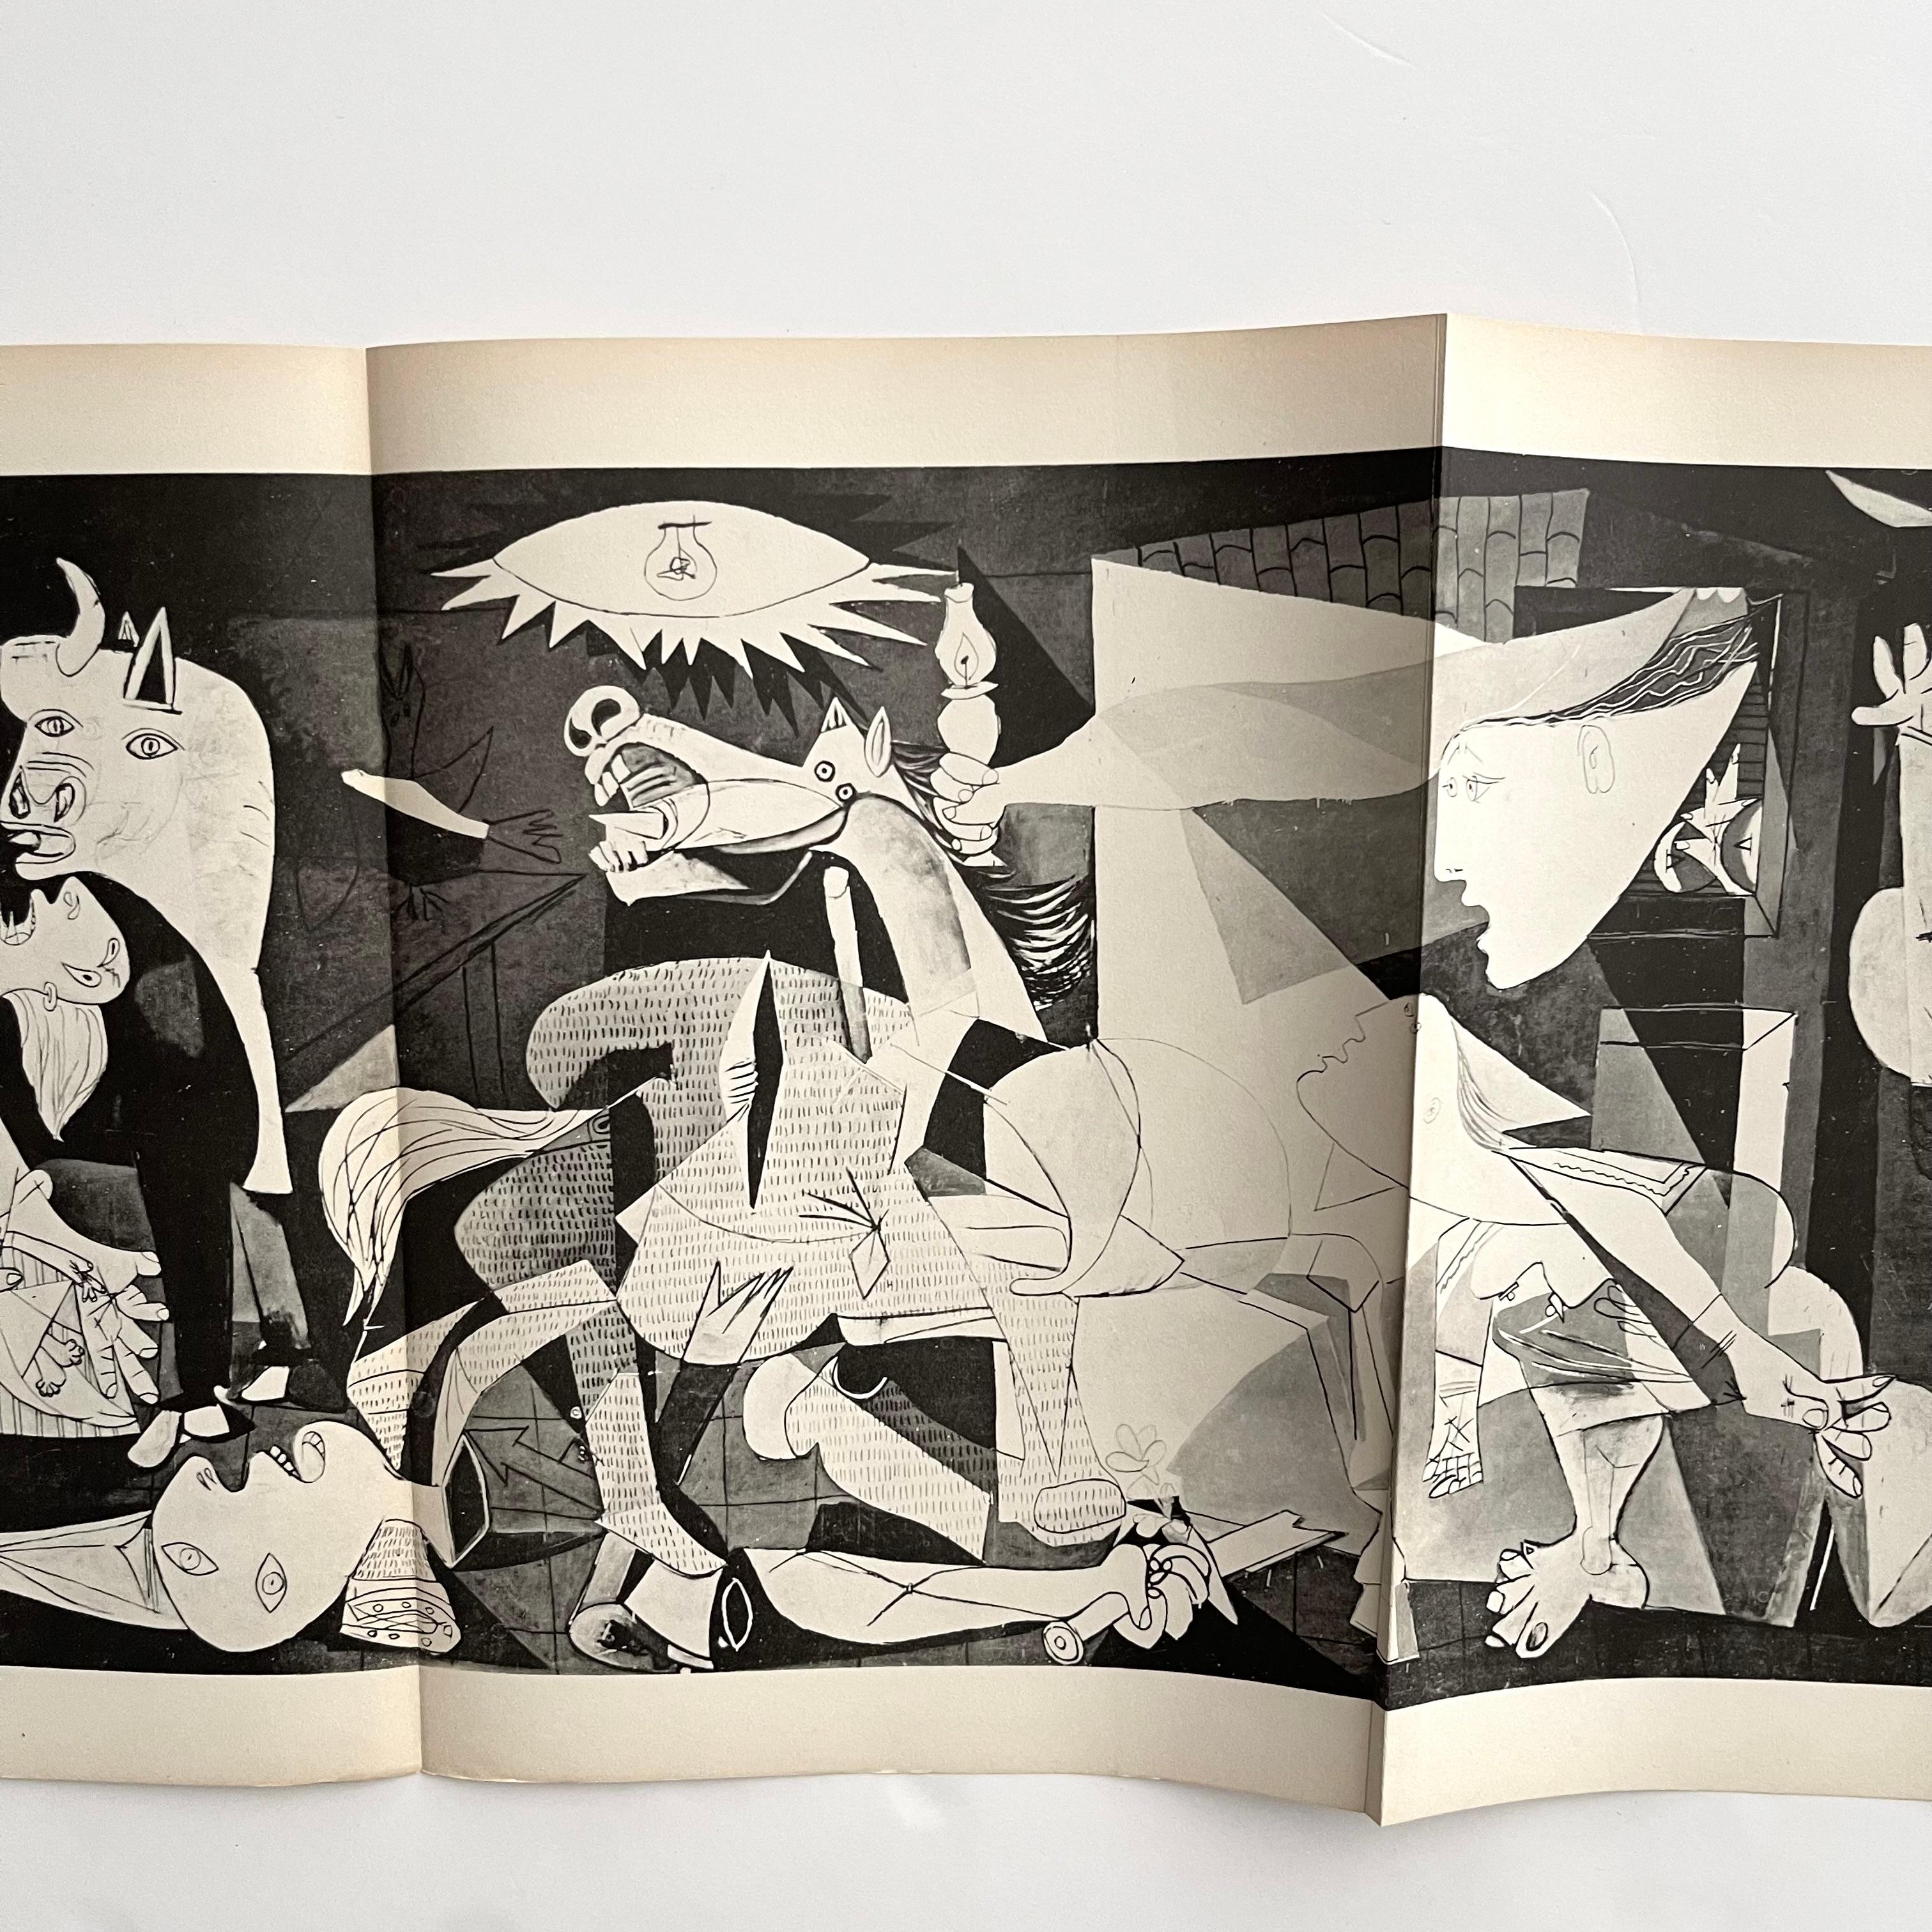 Published by Curt Valentin New York 1st edition 1947
Published ten years after the bombing of civilians in Guernica during the Spanish civil war and two years after the end of the second World War, this incredibly poignant book follows the history